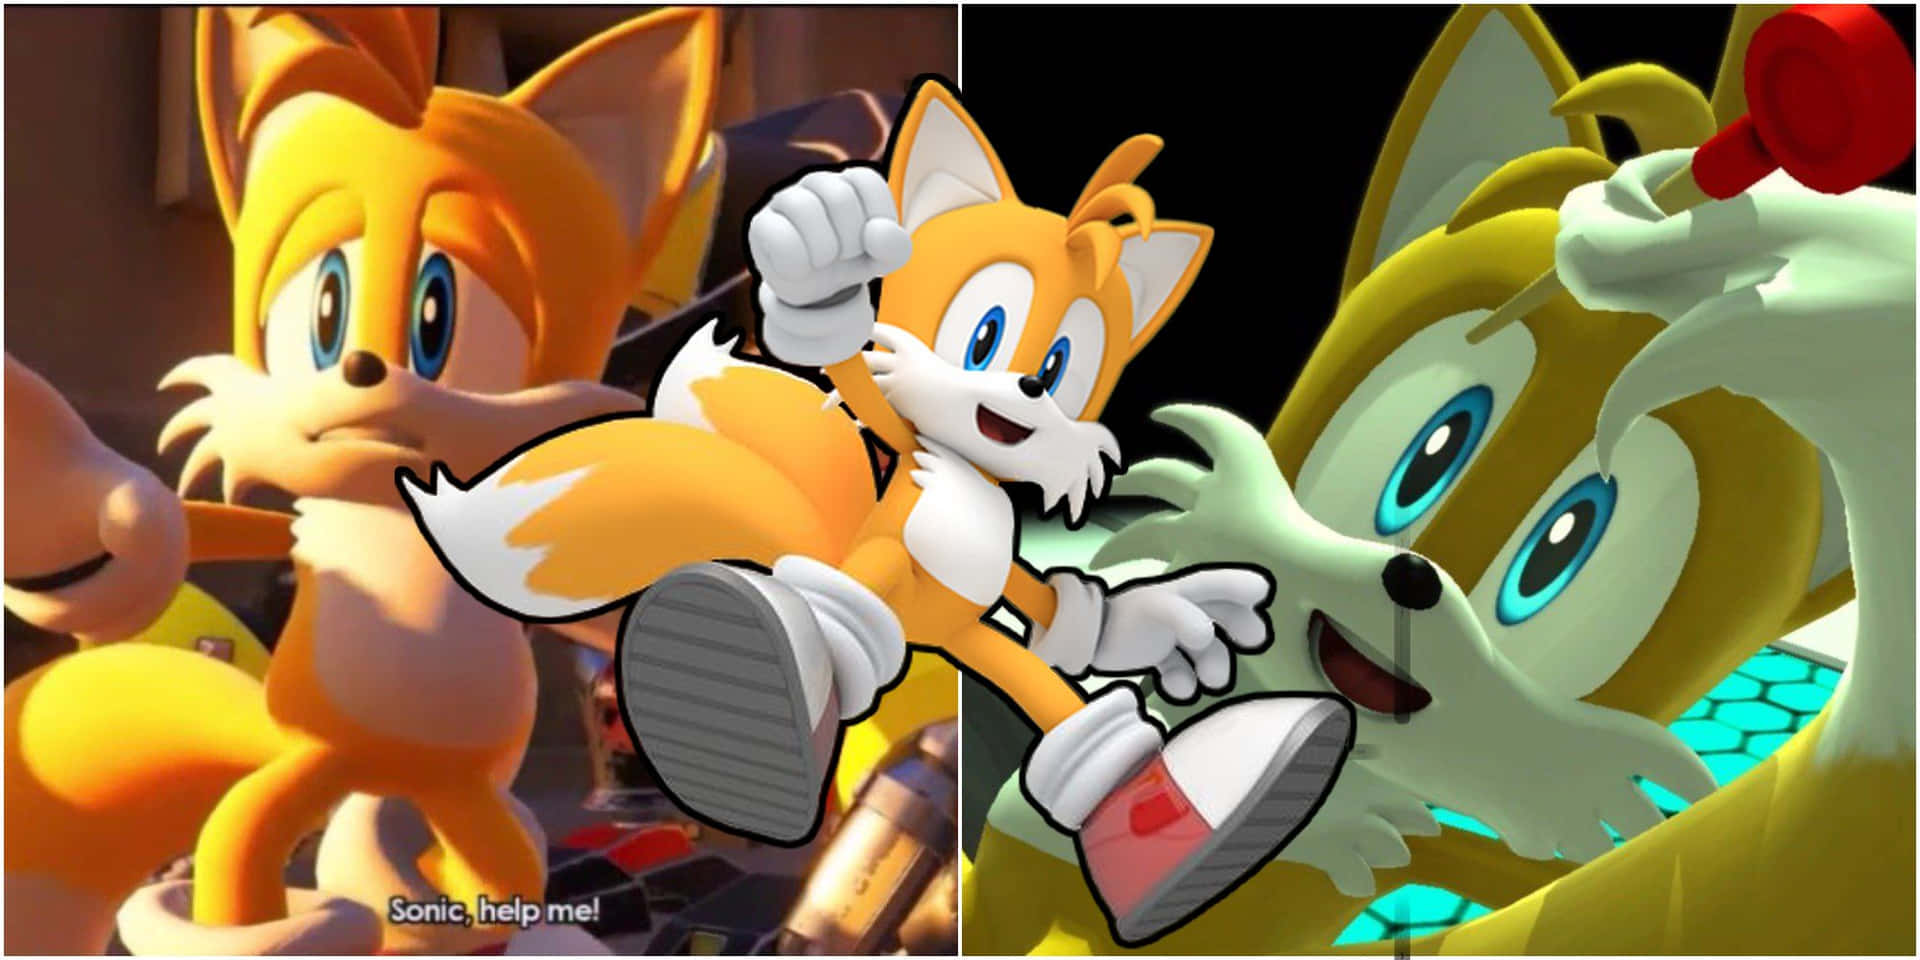 Tails from Sonic the Hedgehog Wallpaper